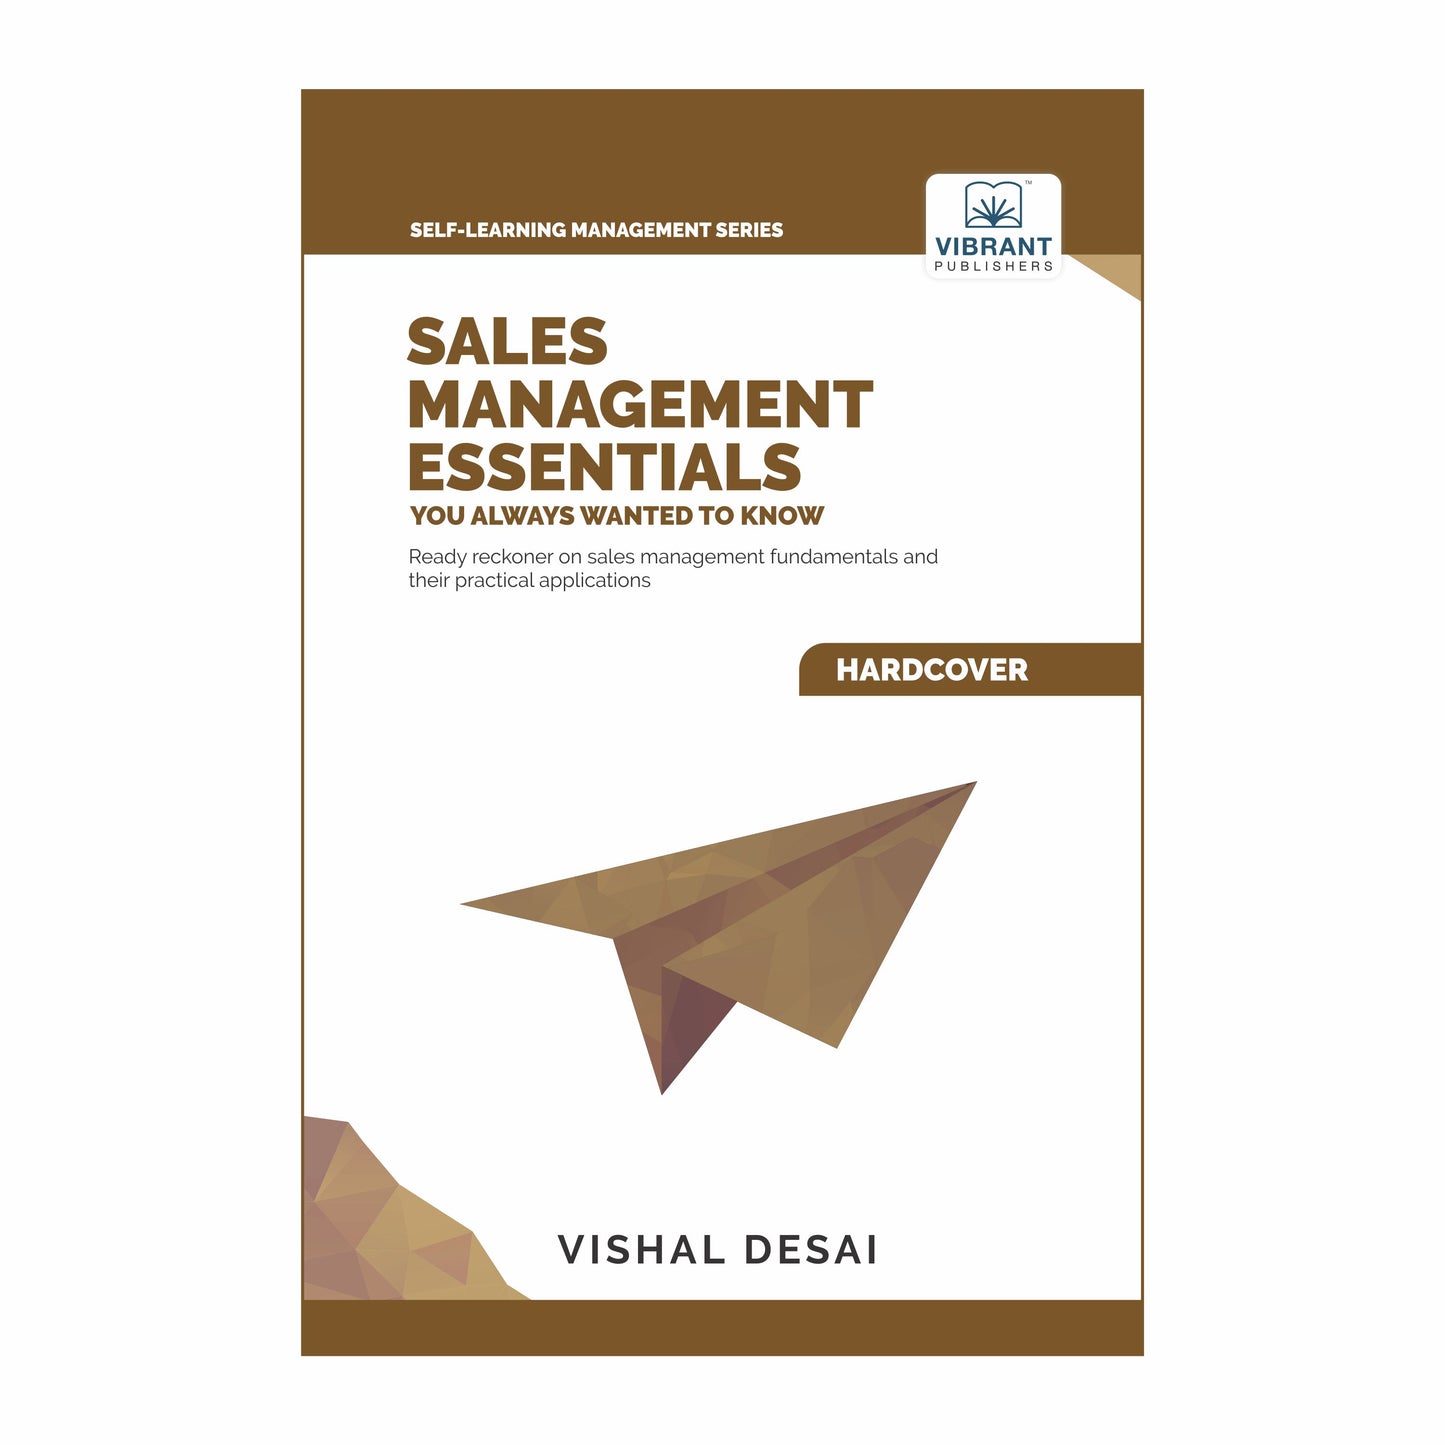 Sales Management Essentials You Always Wanted To Know